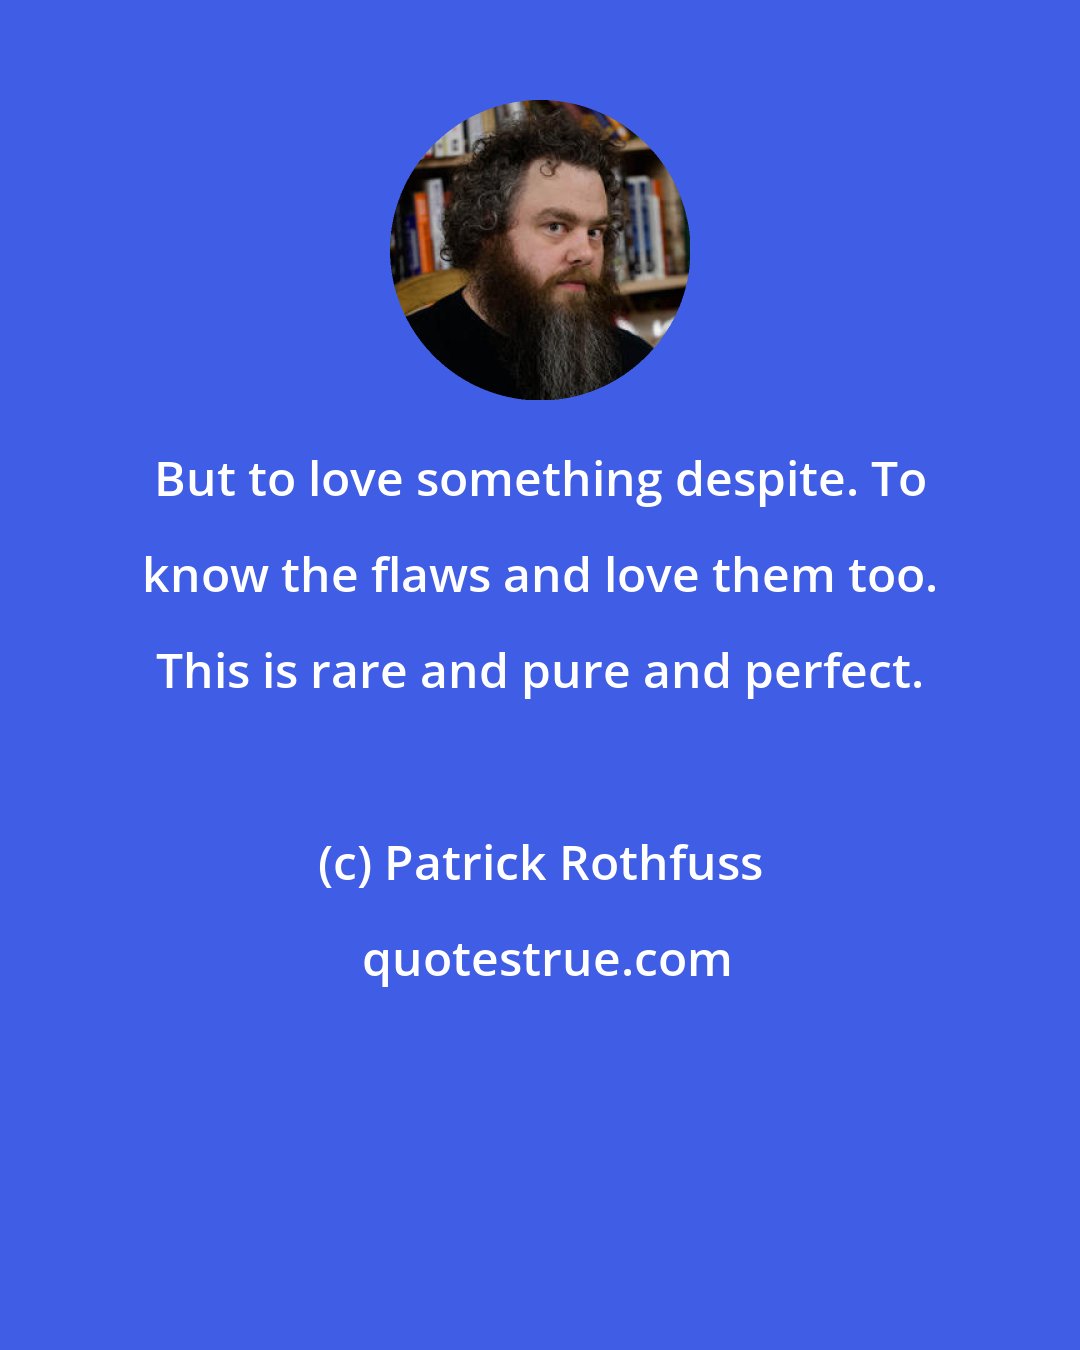 Patrick Rothfuss: But to love something despite. To know the flaws and love them too. This is rare and pure and perfect.